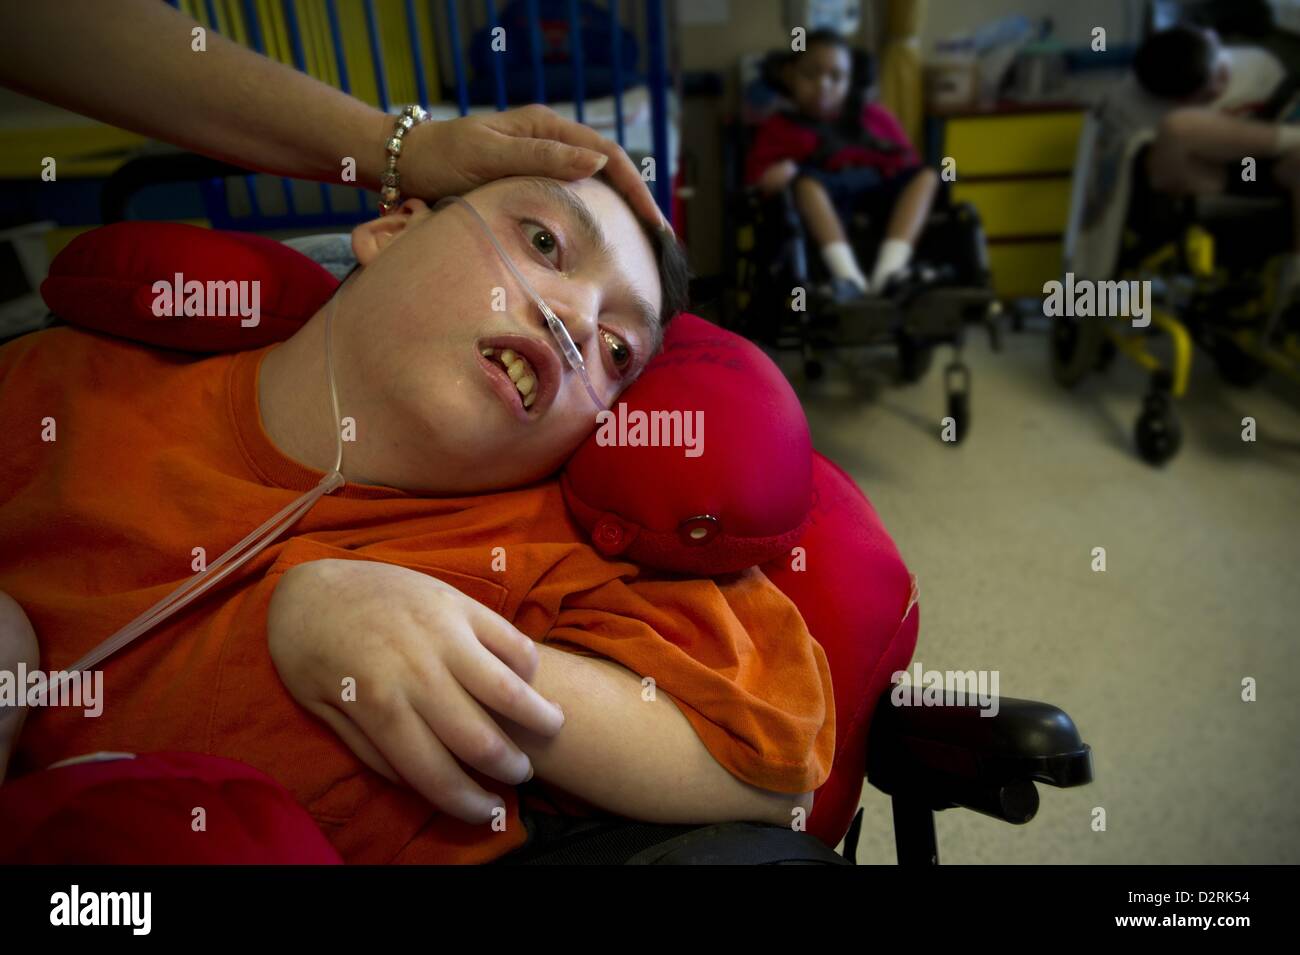 Sept. 3, 2011 - Montgomery, AL - NOLA SAYNE'S profoundly disabled son ZACH was only ten years old when she was forced to make the gut-wrenching decision to place him in a nursing home. She was unable to find a facility in Georgia where they lived. The closest skilled-care facility that would accept him was 200 miles away from home.Nola thought about quitting her job as a paralegal, but she was a single mother then with two kids. She needed her salary, and she needed the health insurance for Zach. The state of Georgia would pay nothing if Zach lived at home. But it offered to pay the full cost  Stock Photo